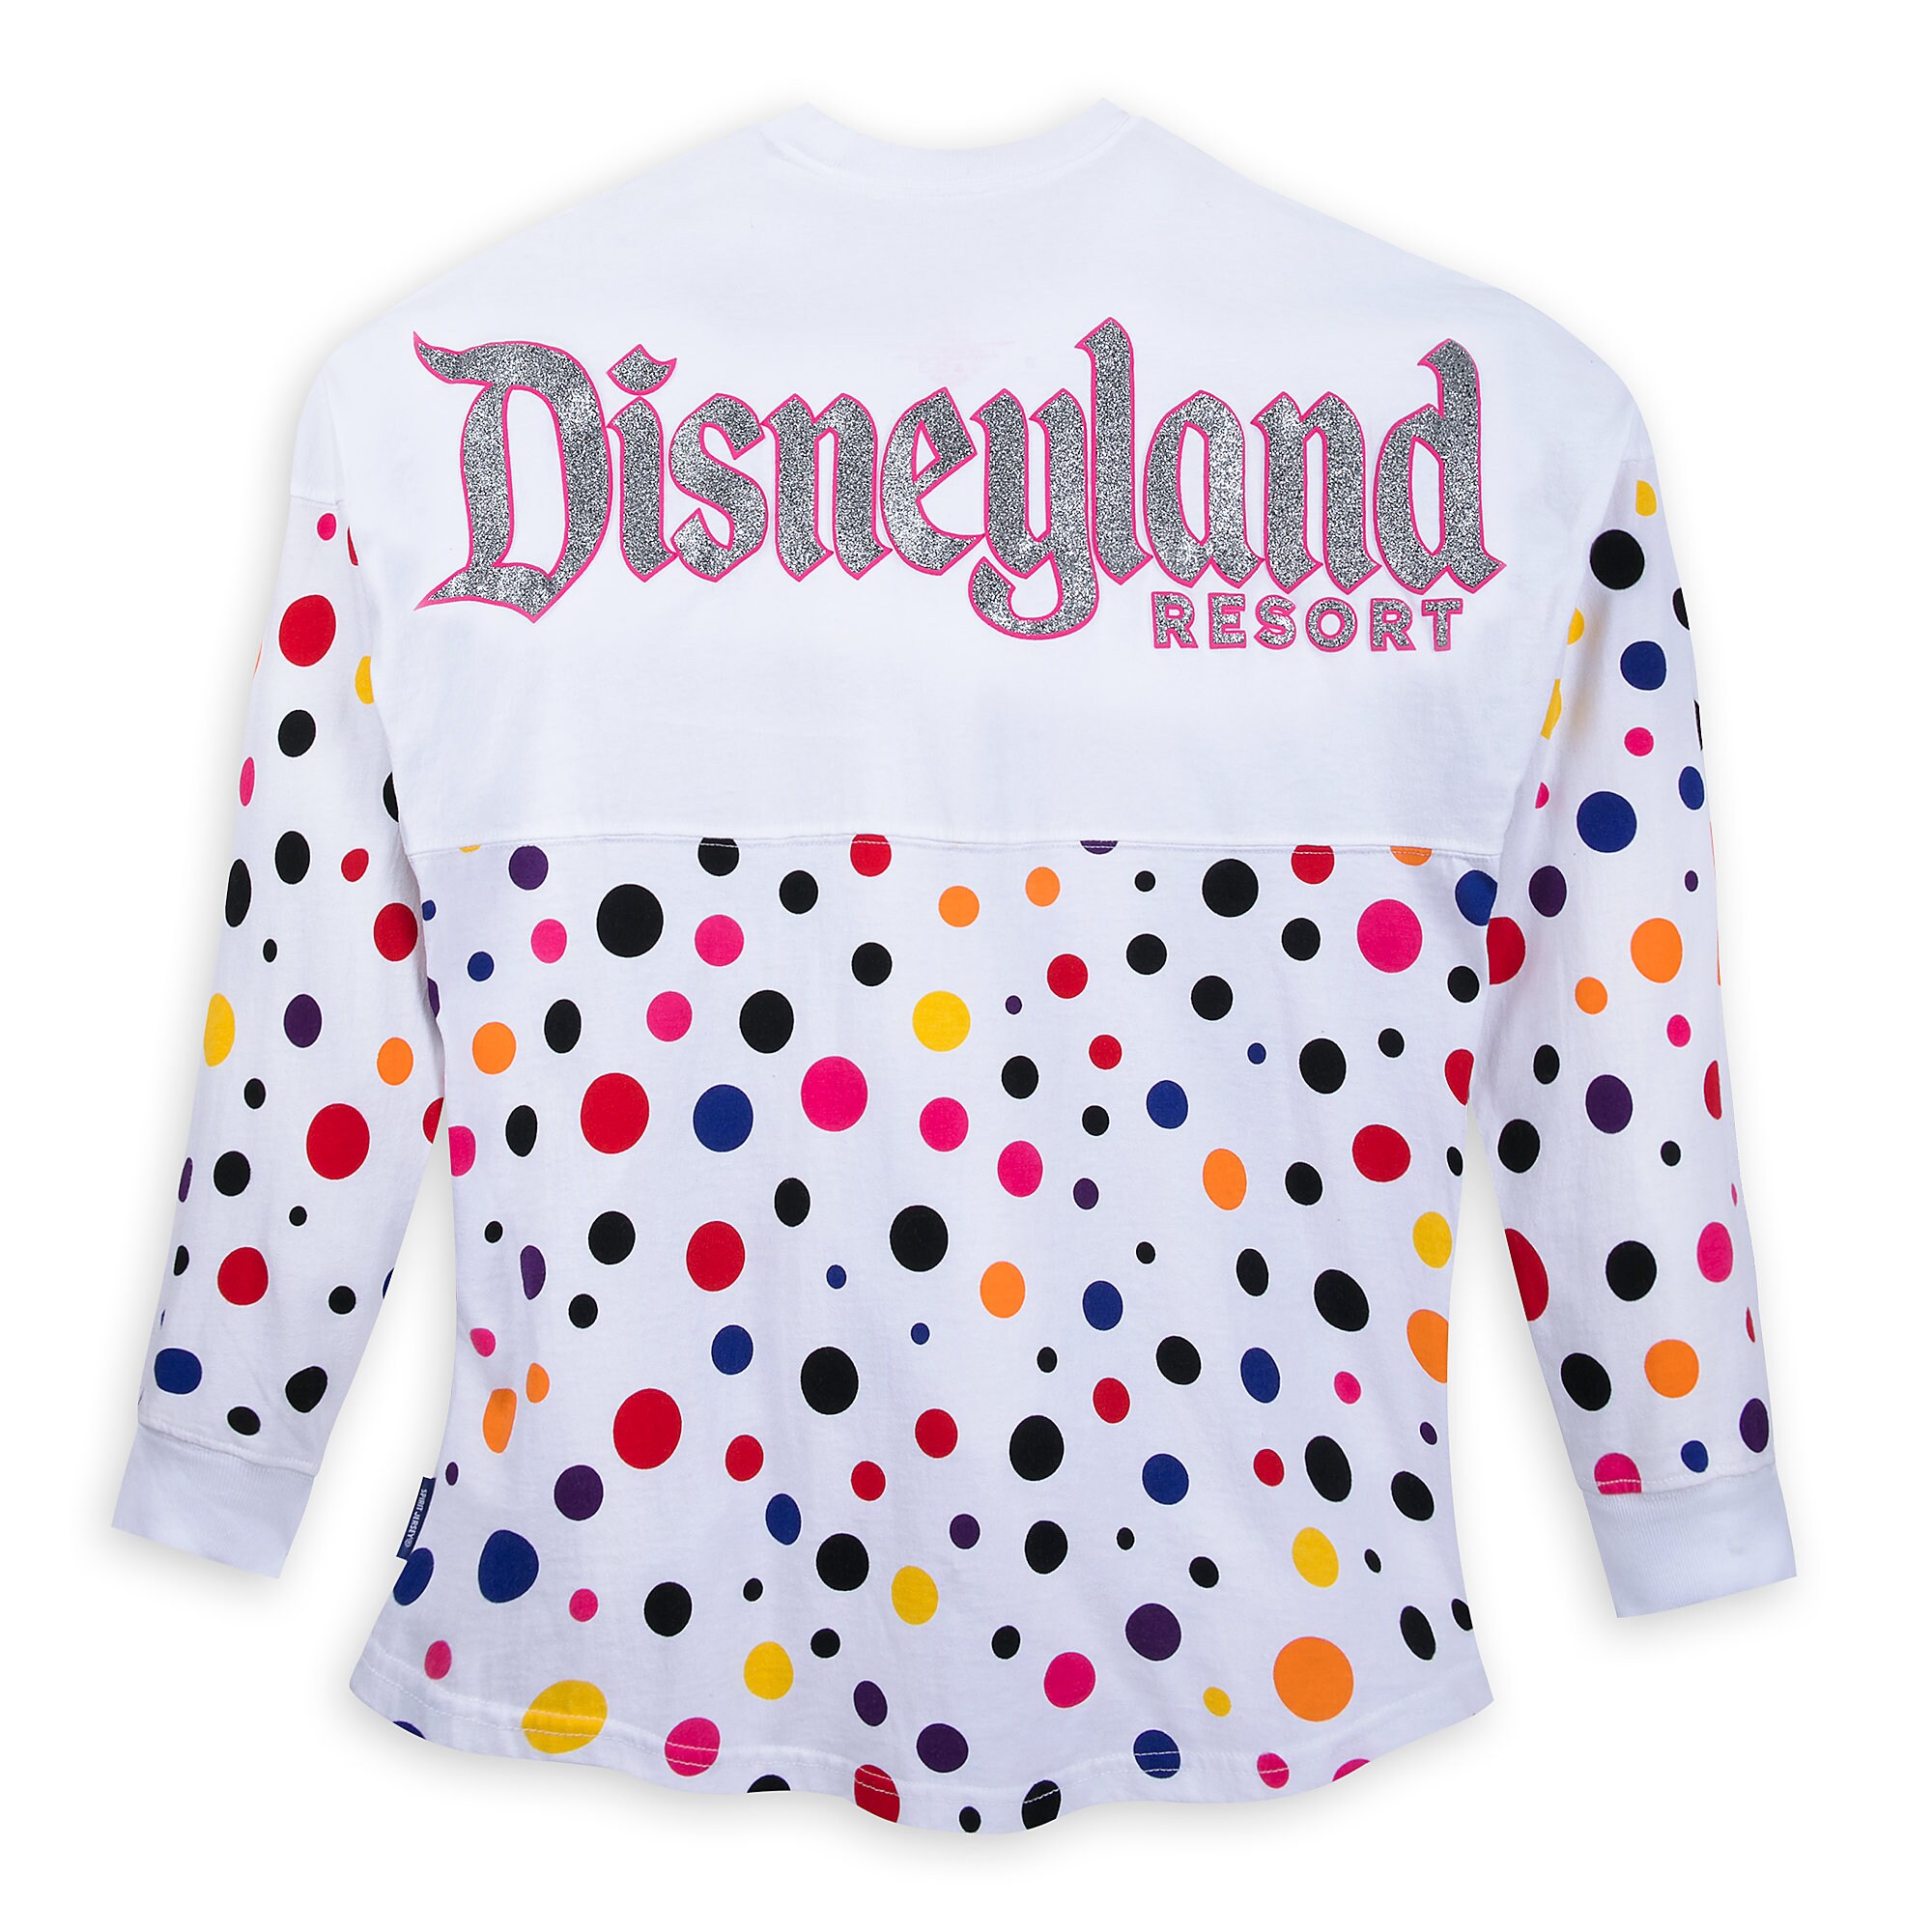 Minnie Mouse Polka Dot Spirit Jersey for Adults - Disneyland